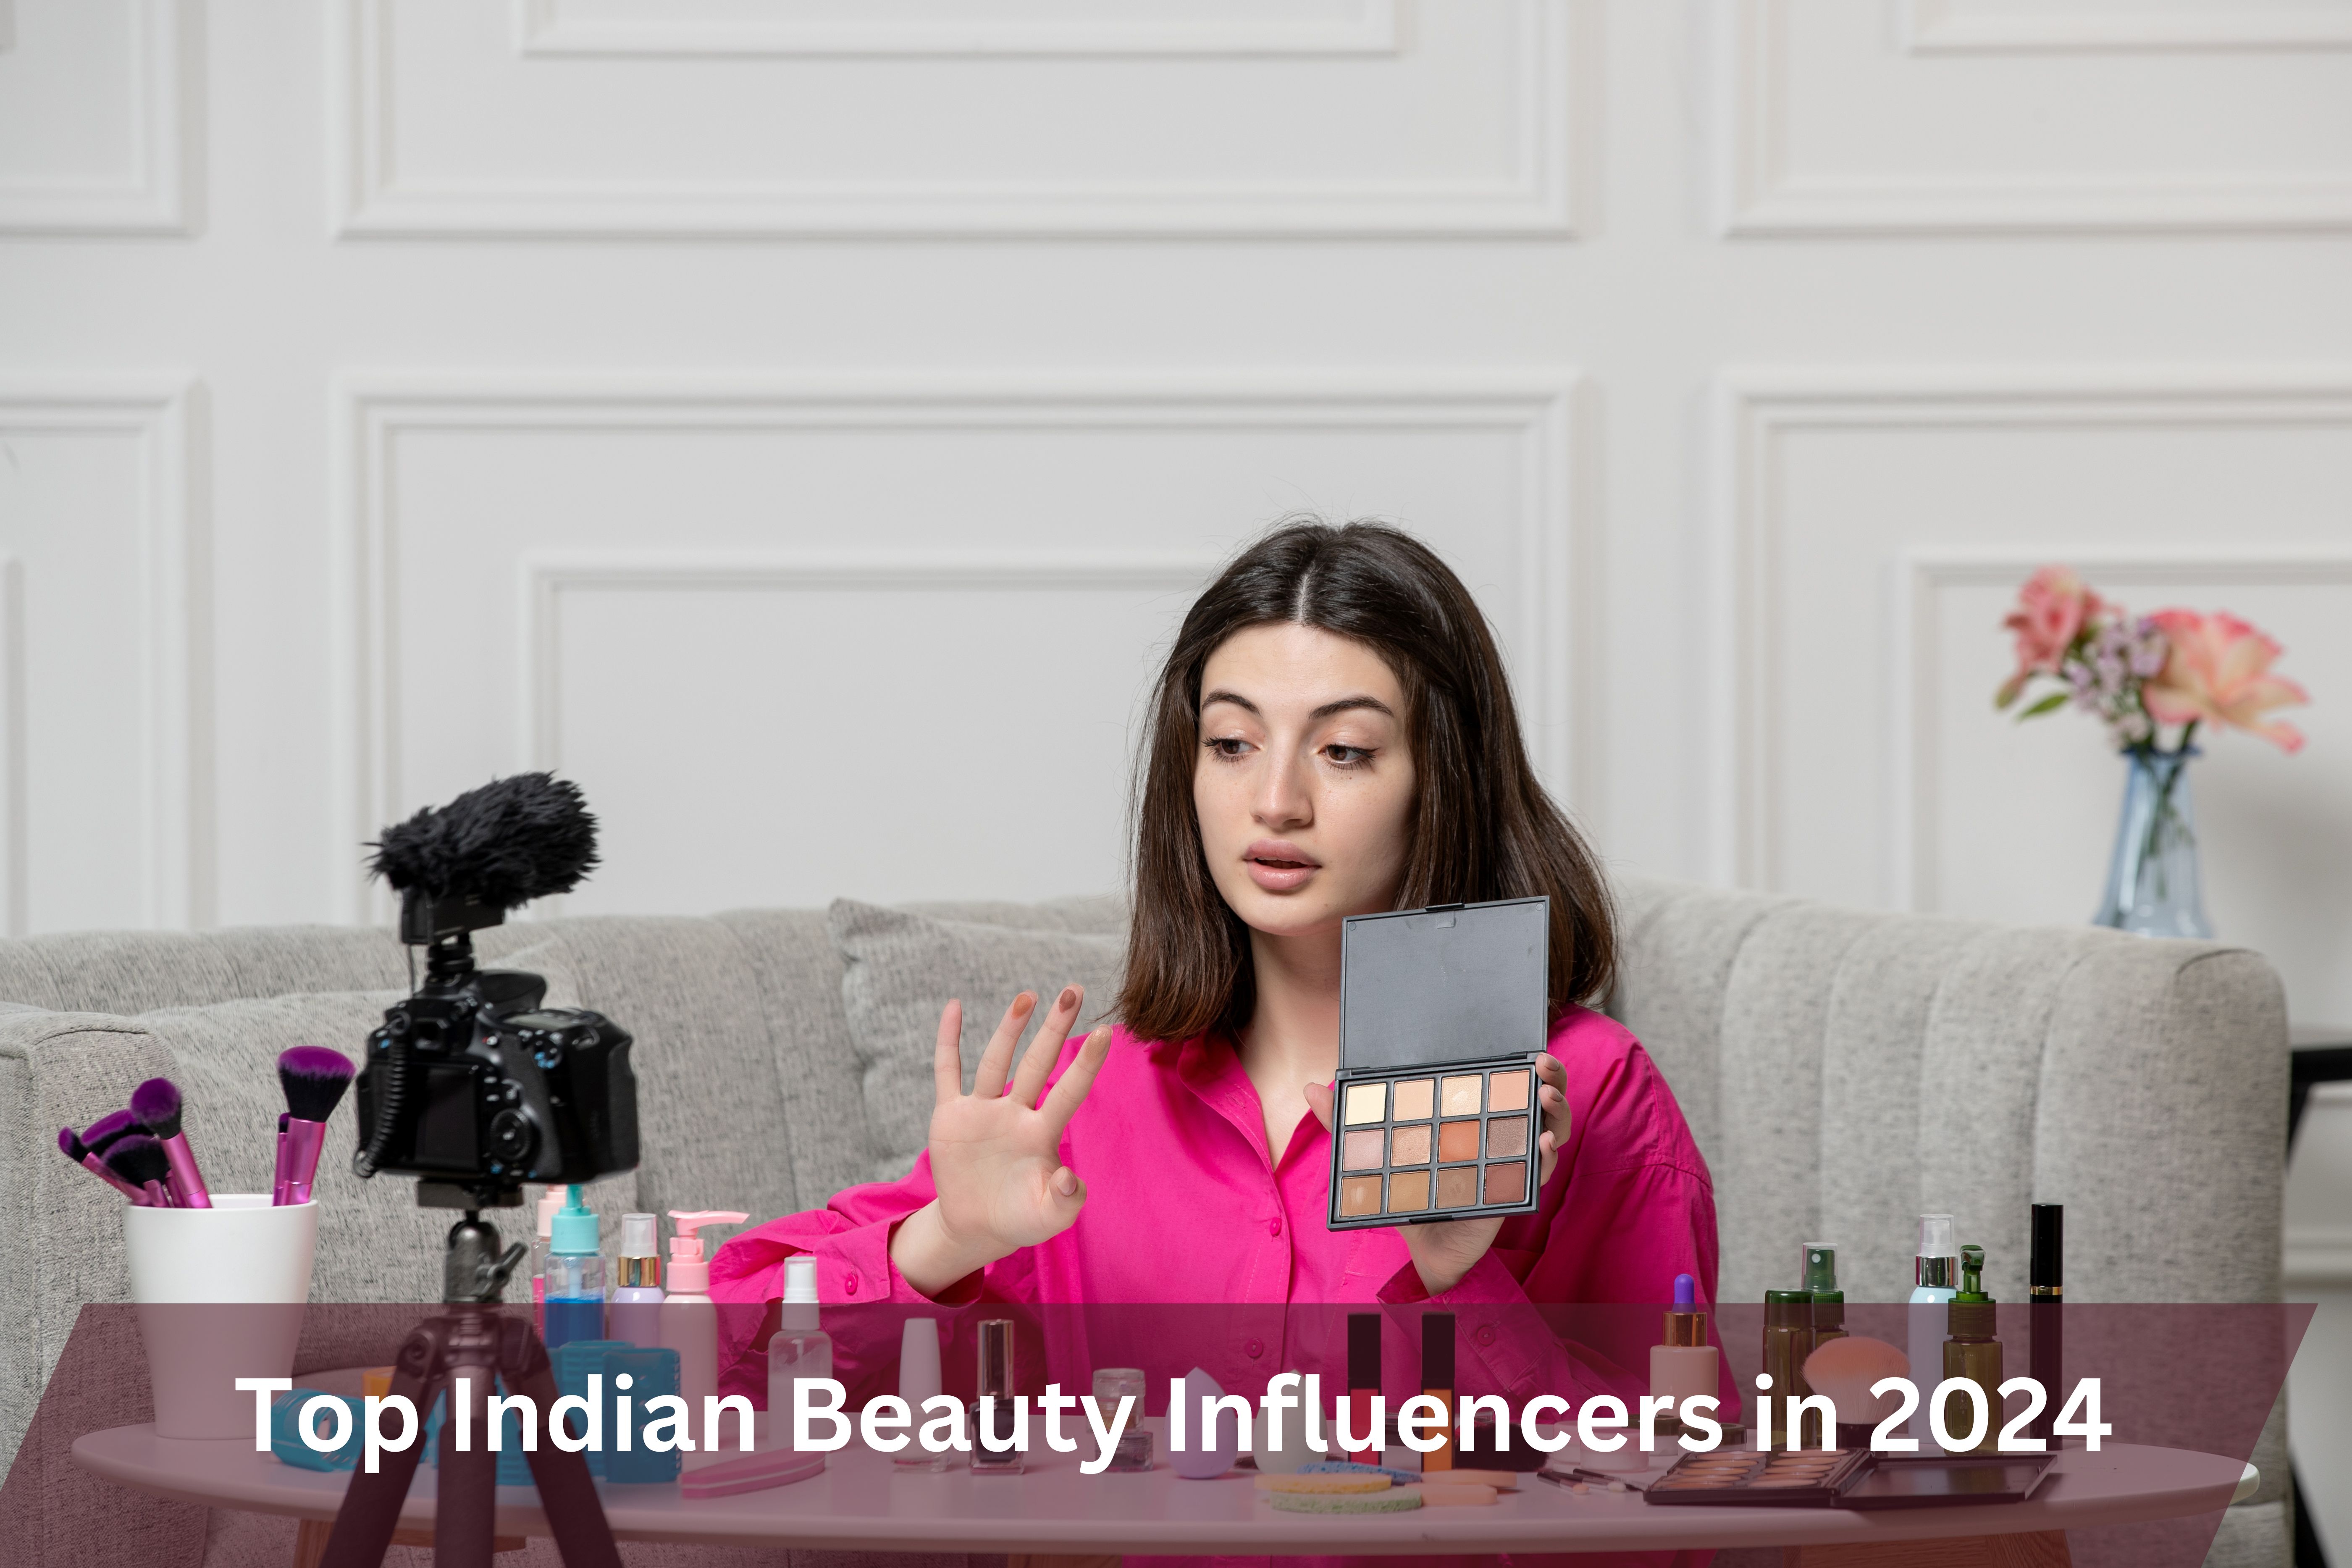 Top Indian beauty influencers in 2024